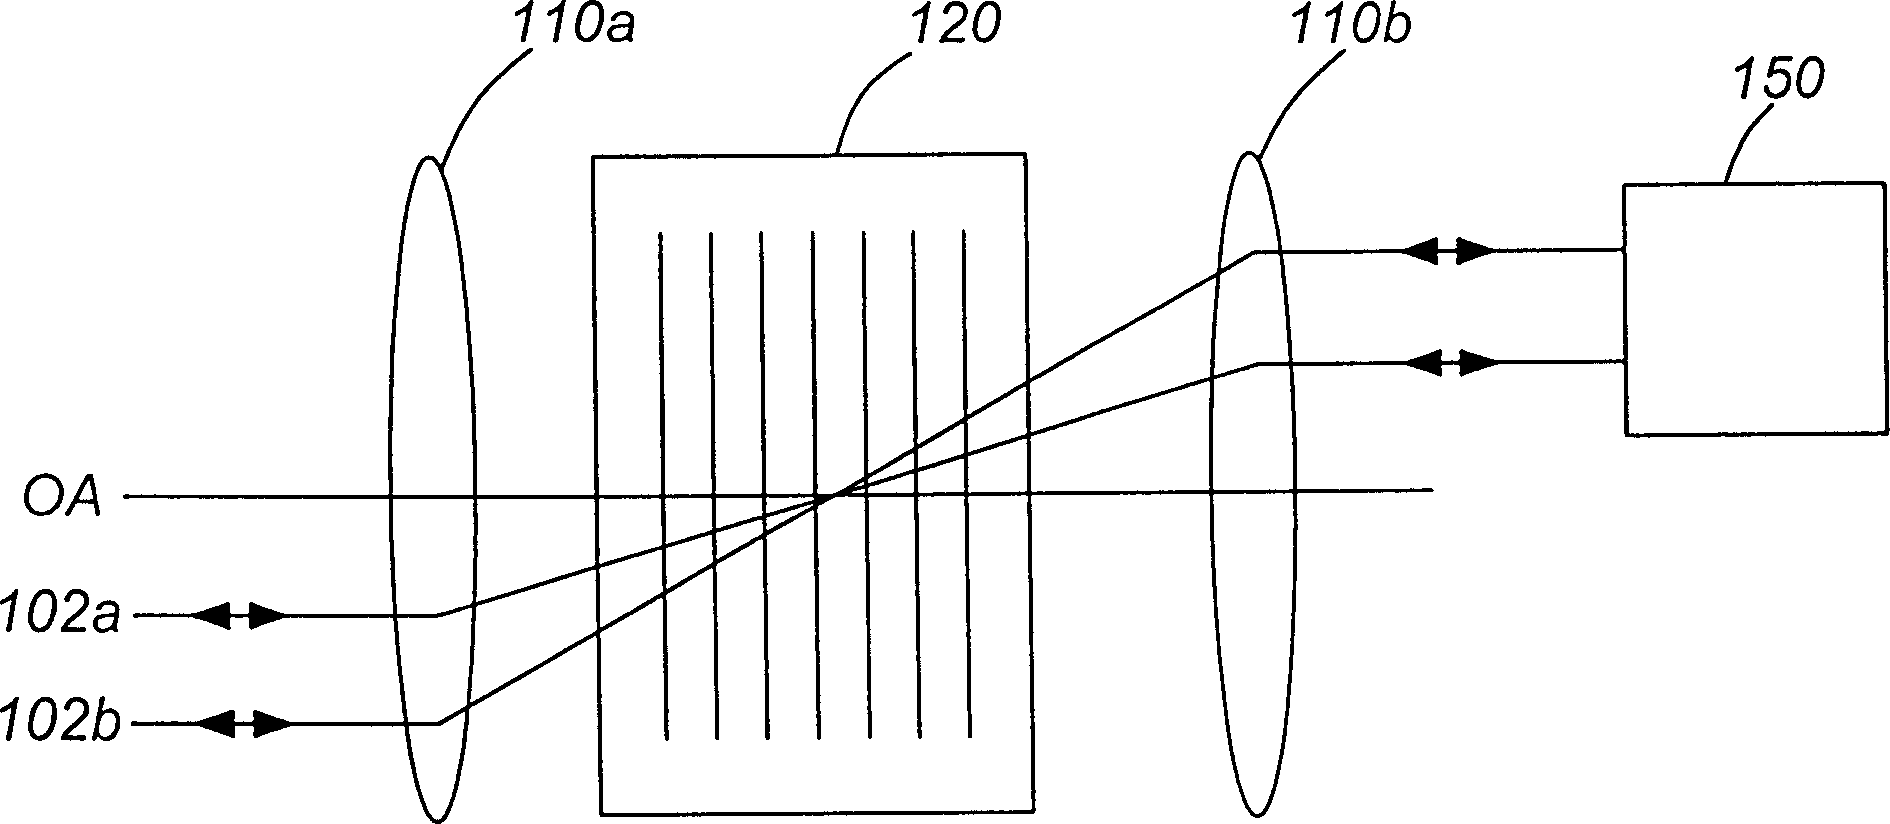 Optical allocation for dynamic gain balancer and adder-subtractor